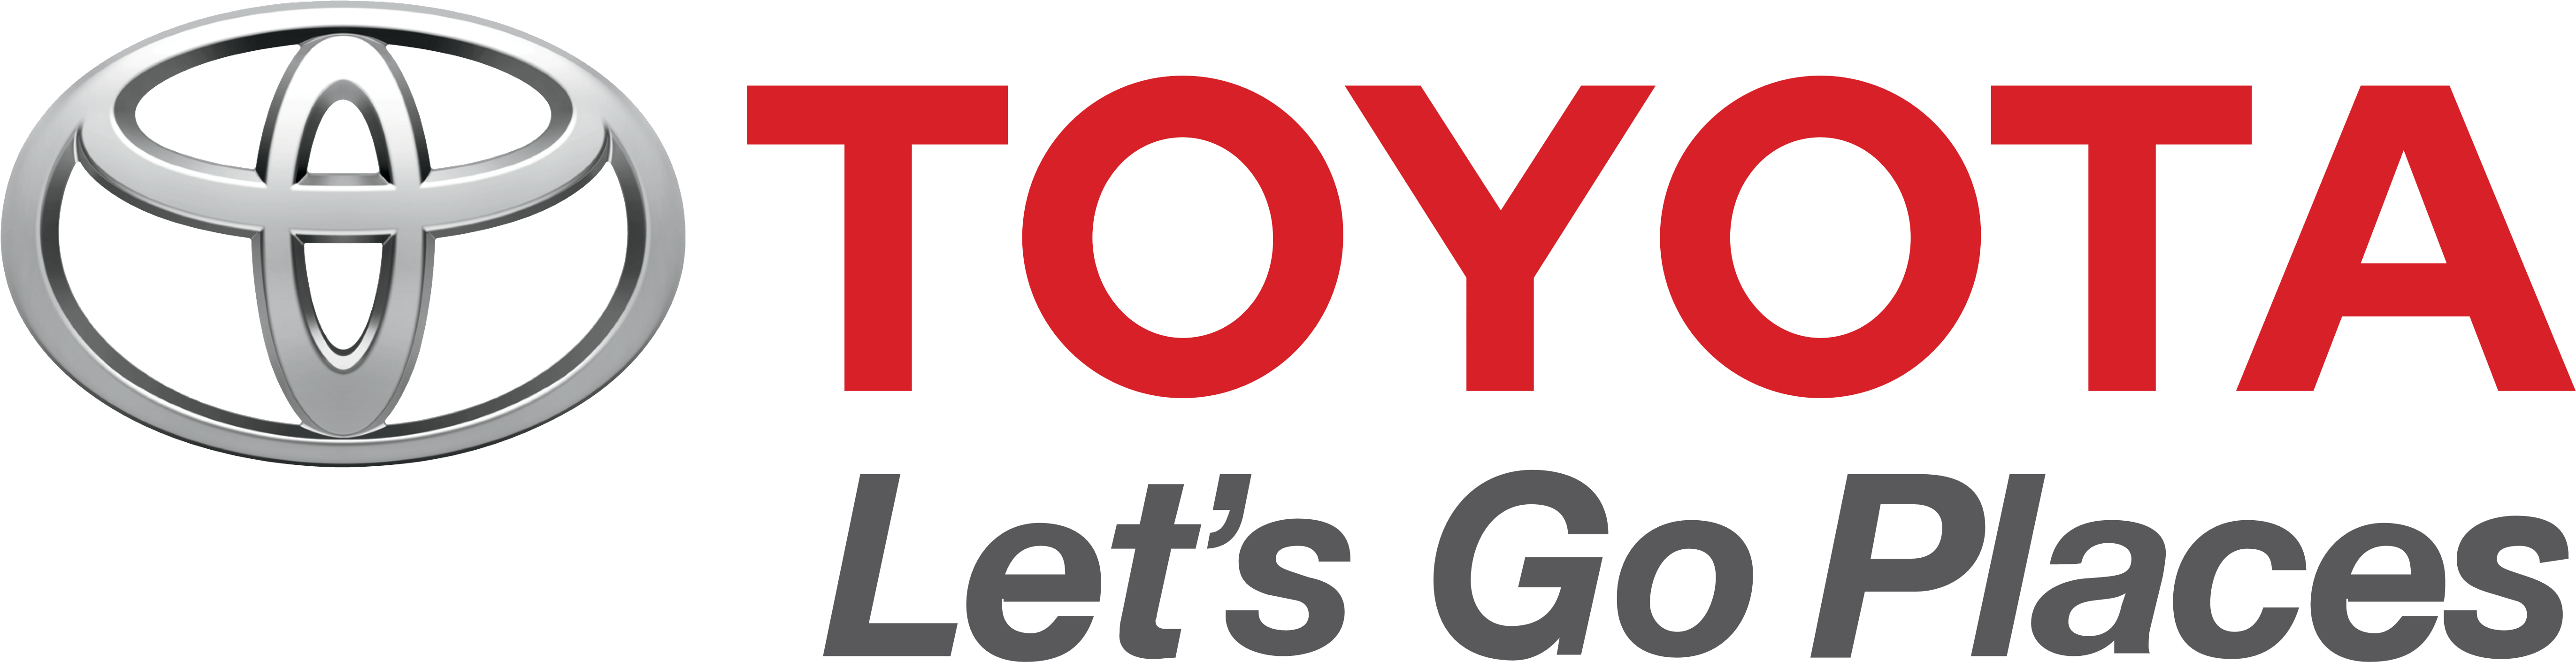 Toyota Logo And Slogan Png Download Toyota